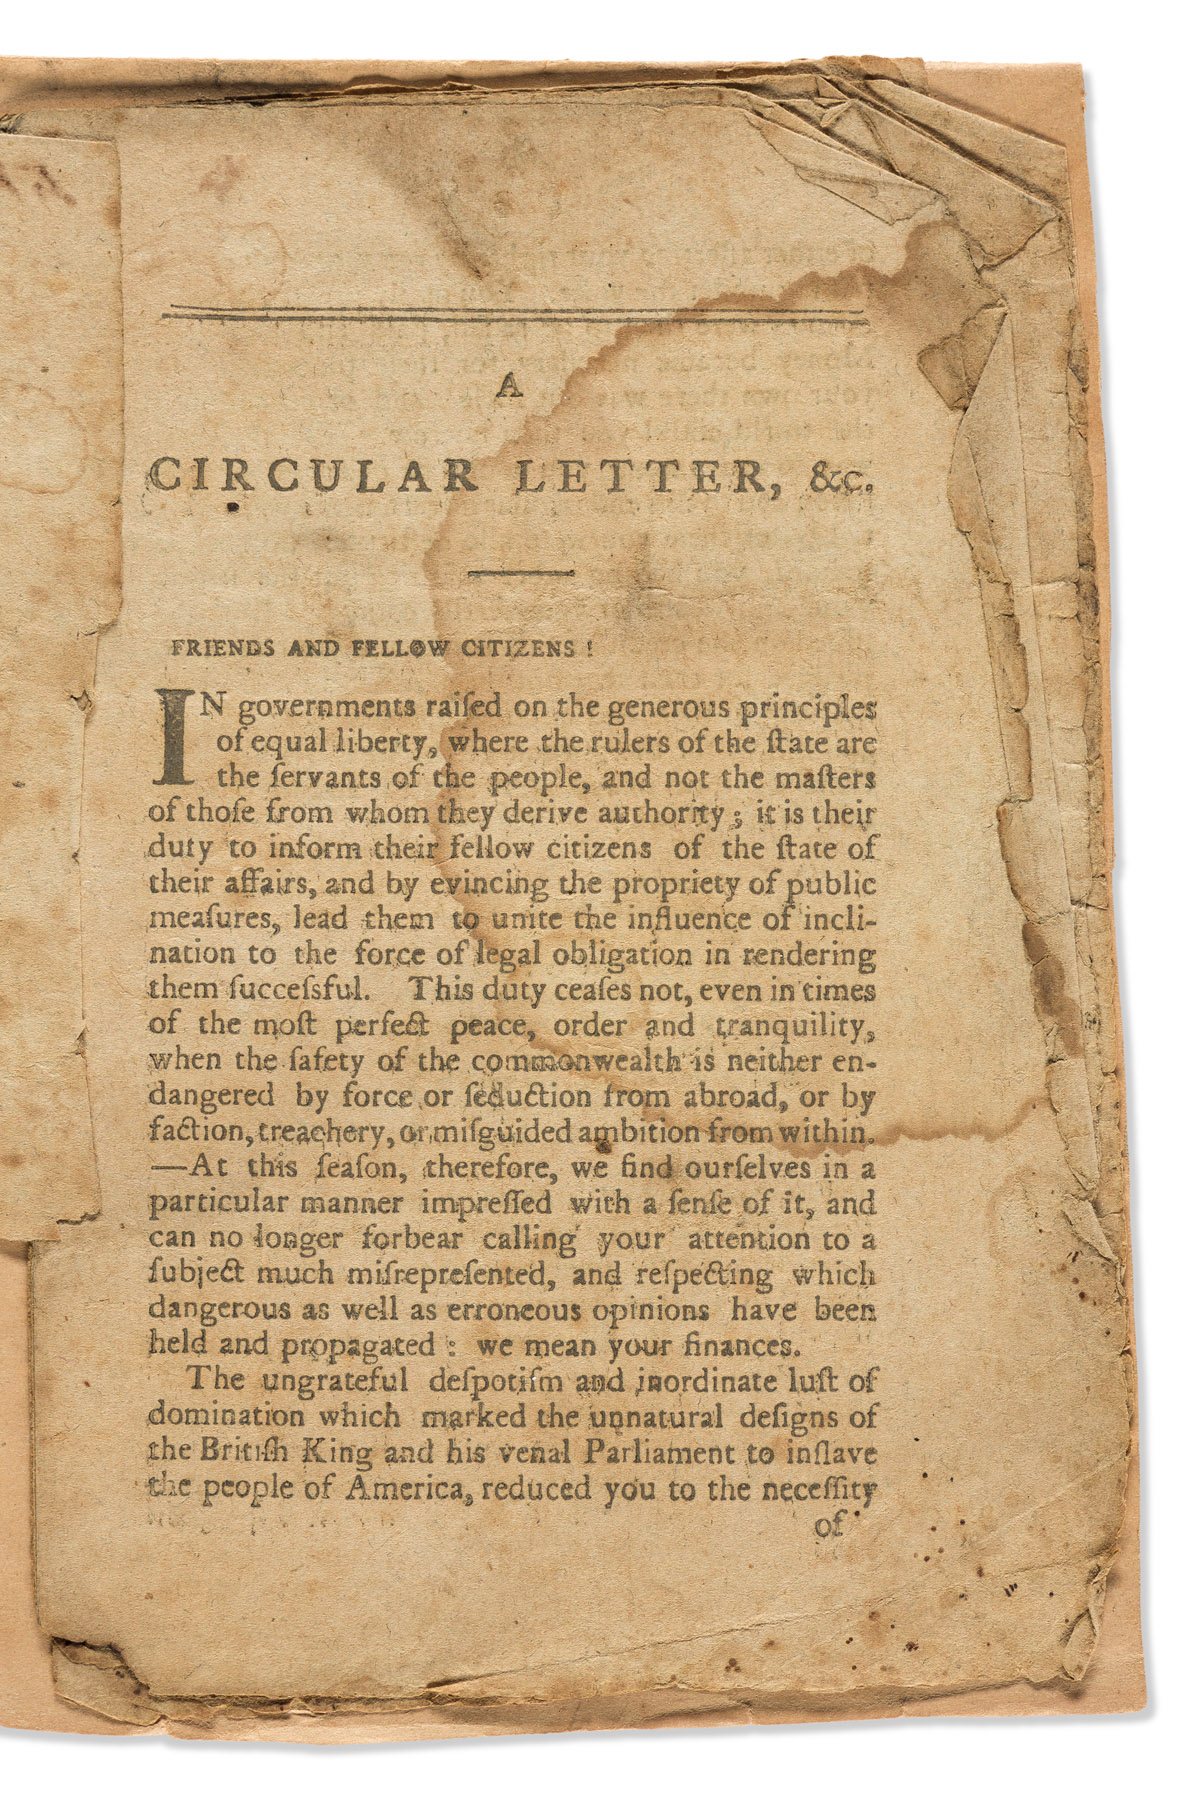 (AMERICAN REVOLUTION--1779.) [John Jay.] A Circular Letter from the Congress of the United States of America to their Constituents.